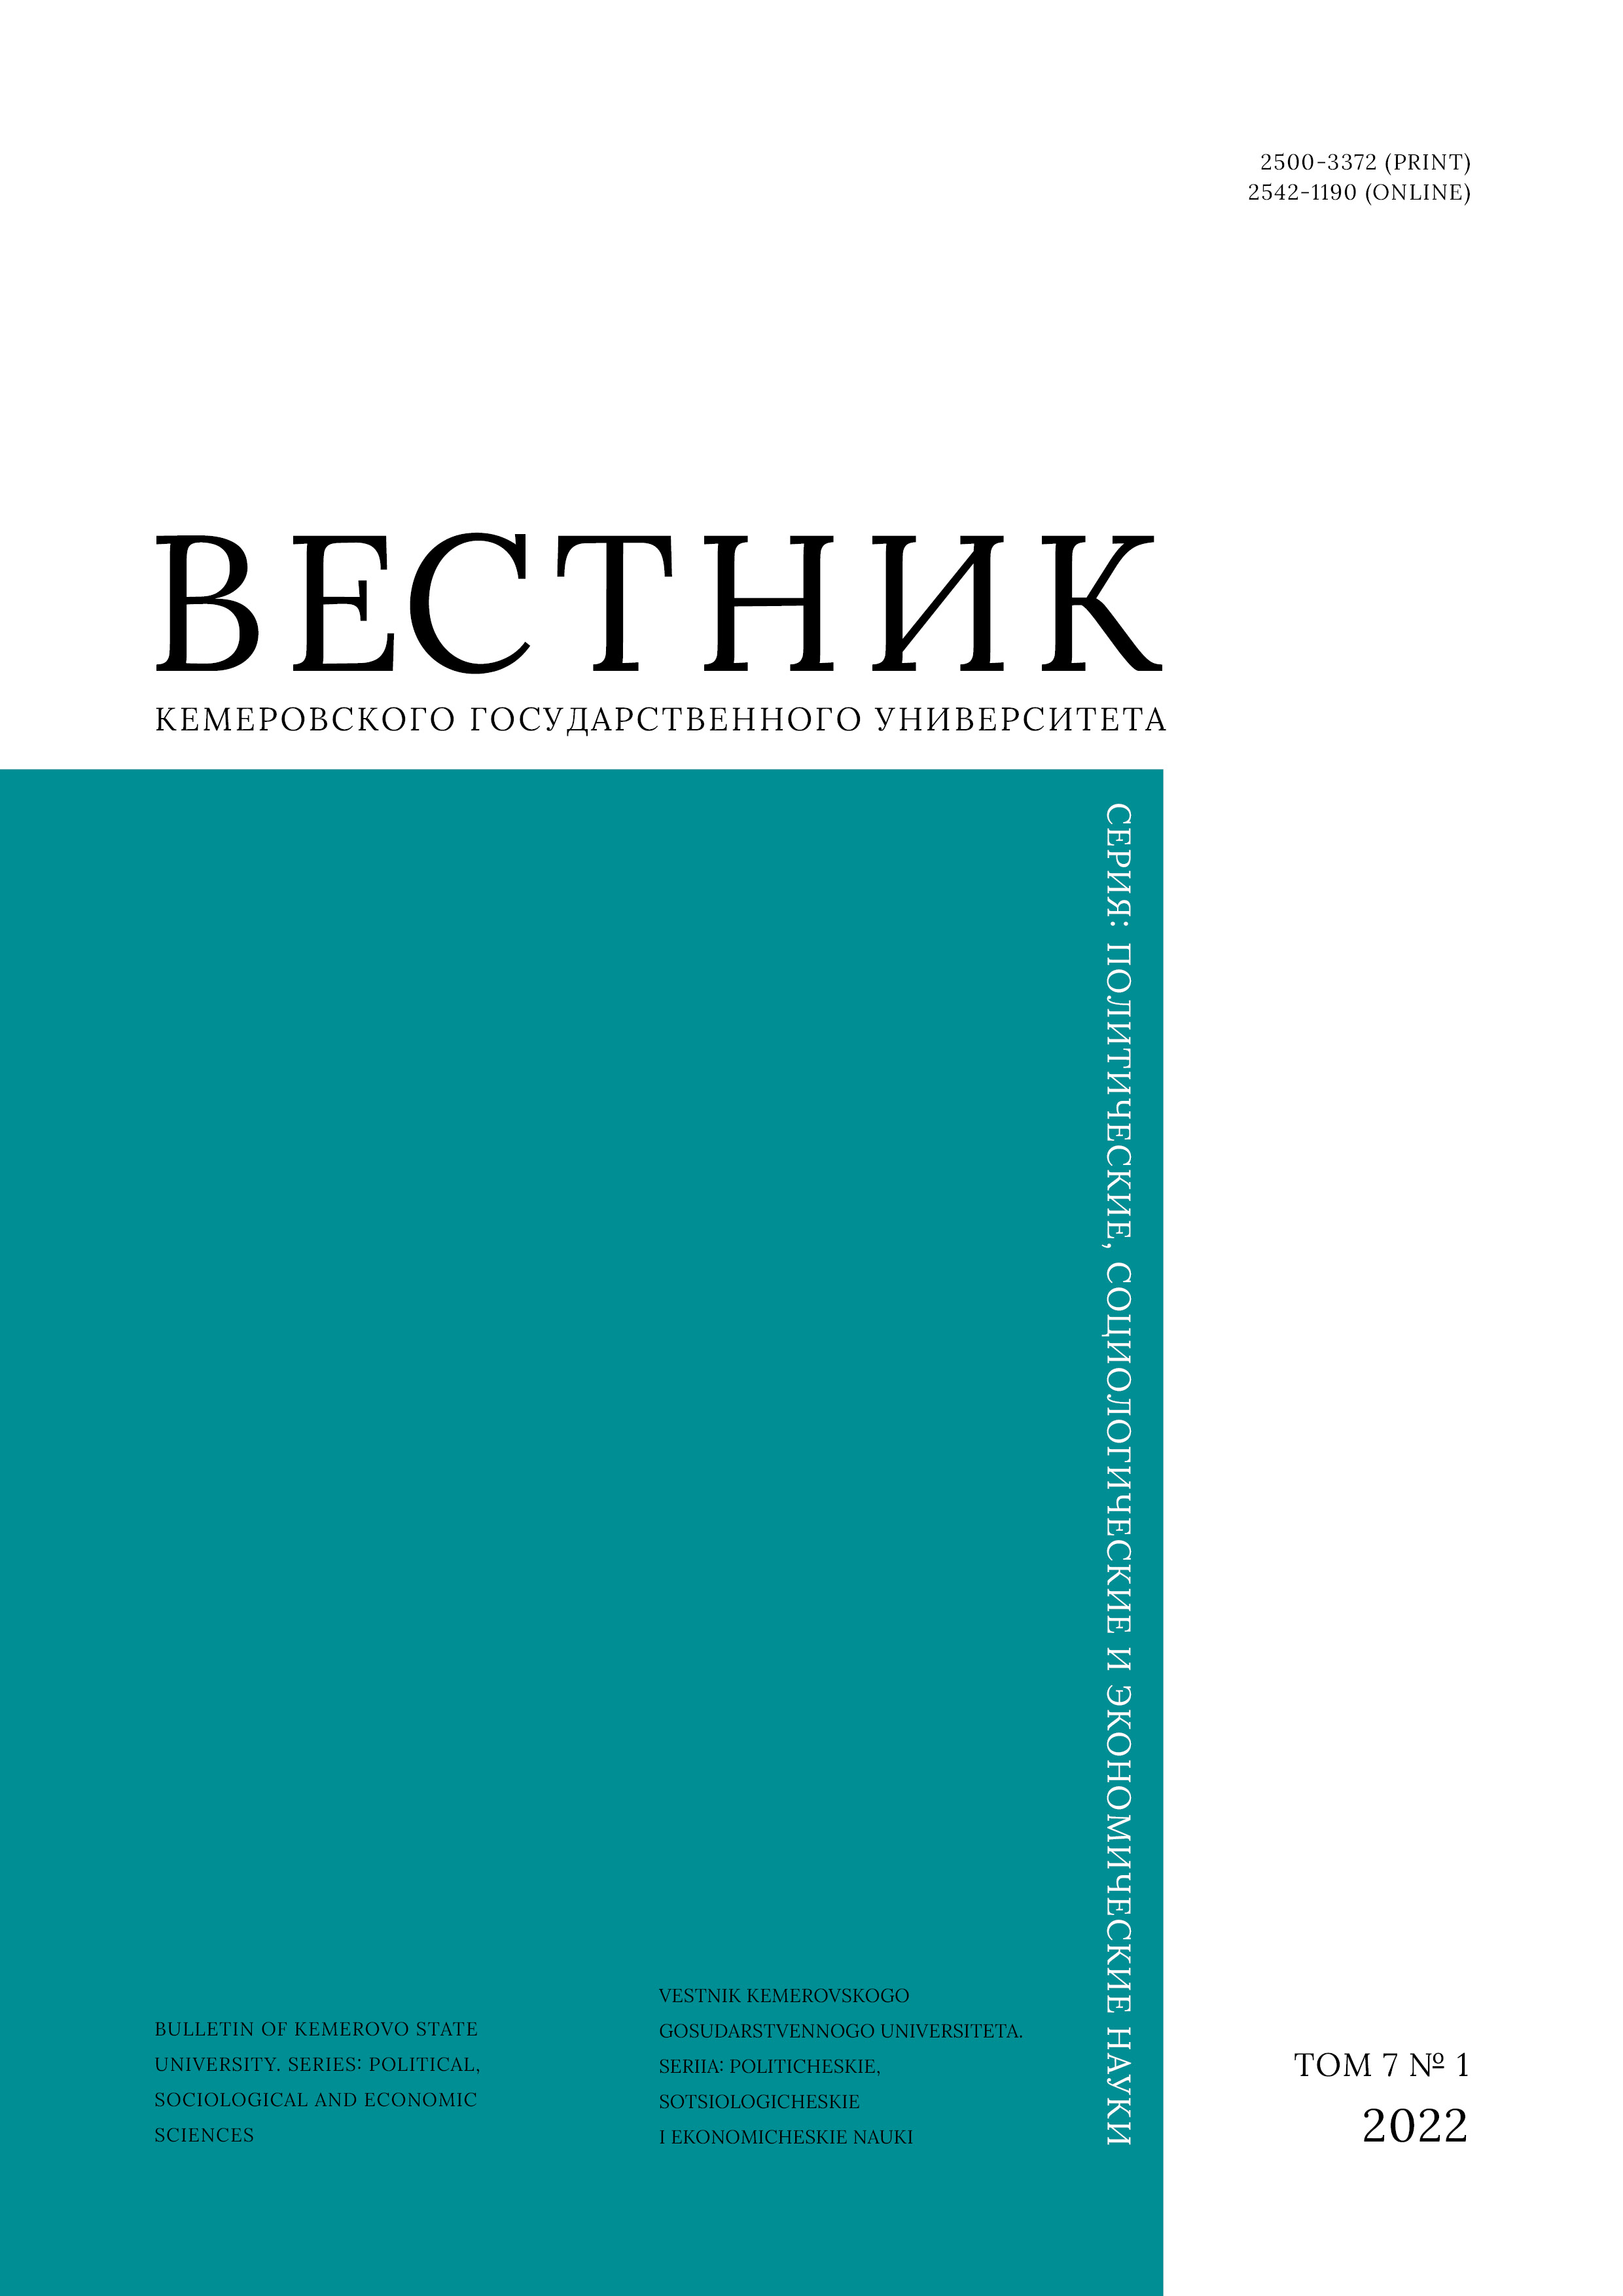                         Methodical Limitations of the Financial Analysis in Transition Economy and the Specificity of the Financial Condition of Industrial Enterprises of the Kemerovo Region
            